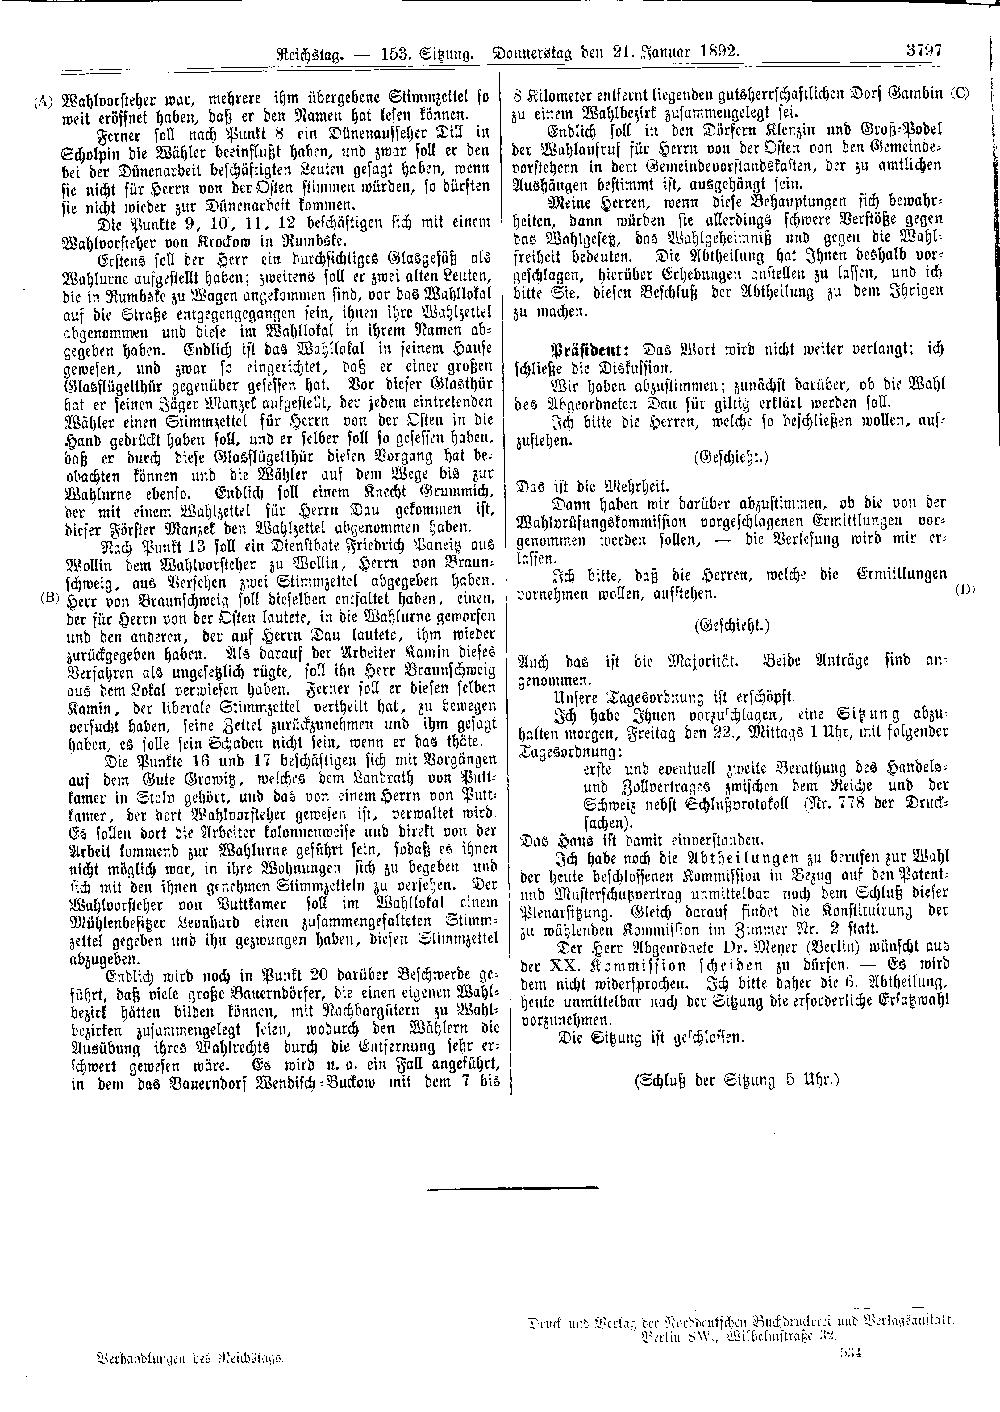 Scan of page 3797